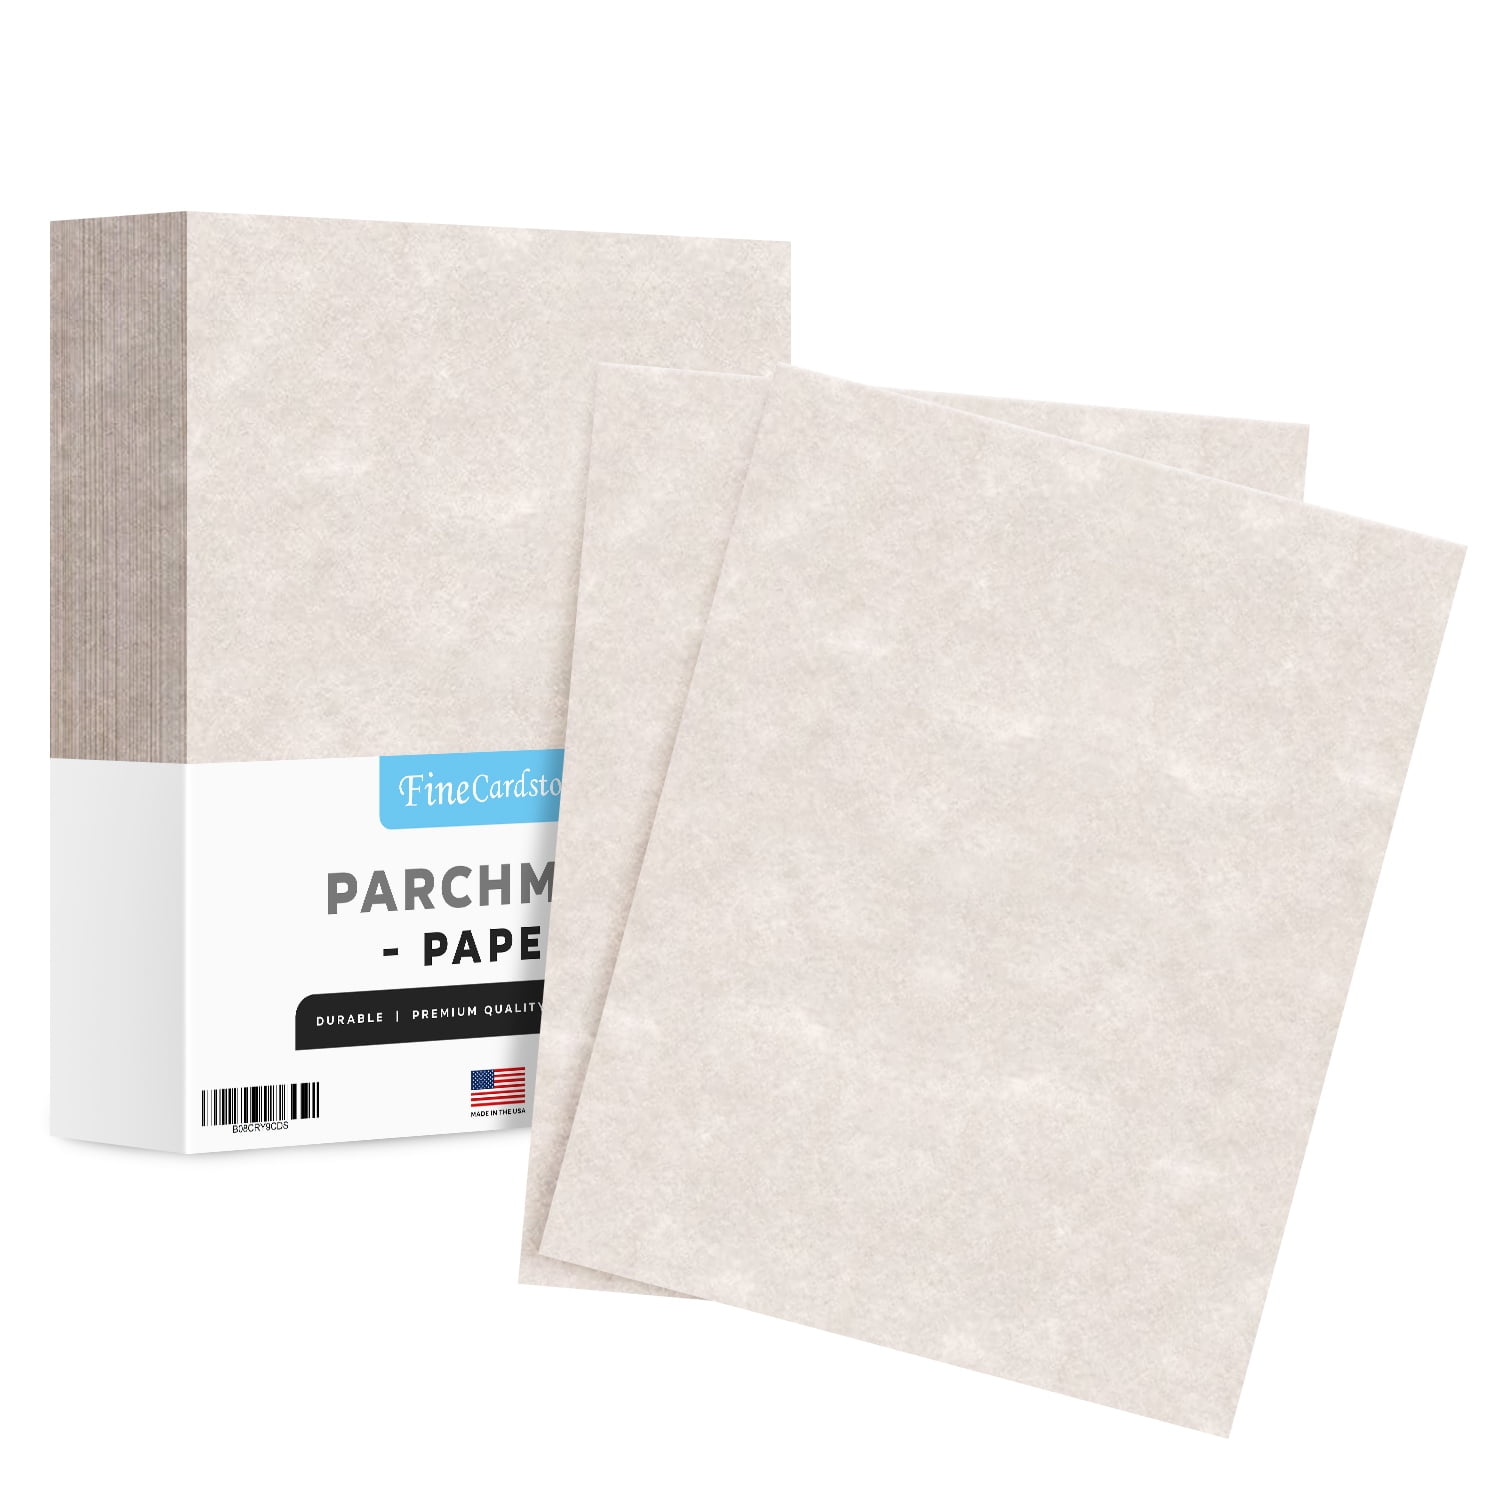 New White Stationery Parchment Paper – Great for Writing, Certificates,  Menus and Wedding Invitations | 24lb Bond Paper | 8.5 x 14” | 50 Sheets Per